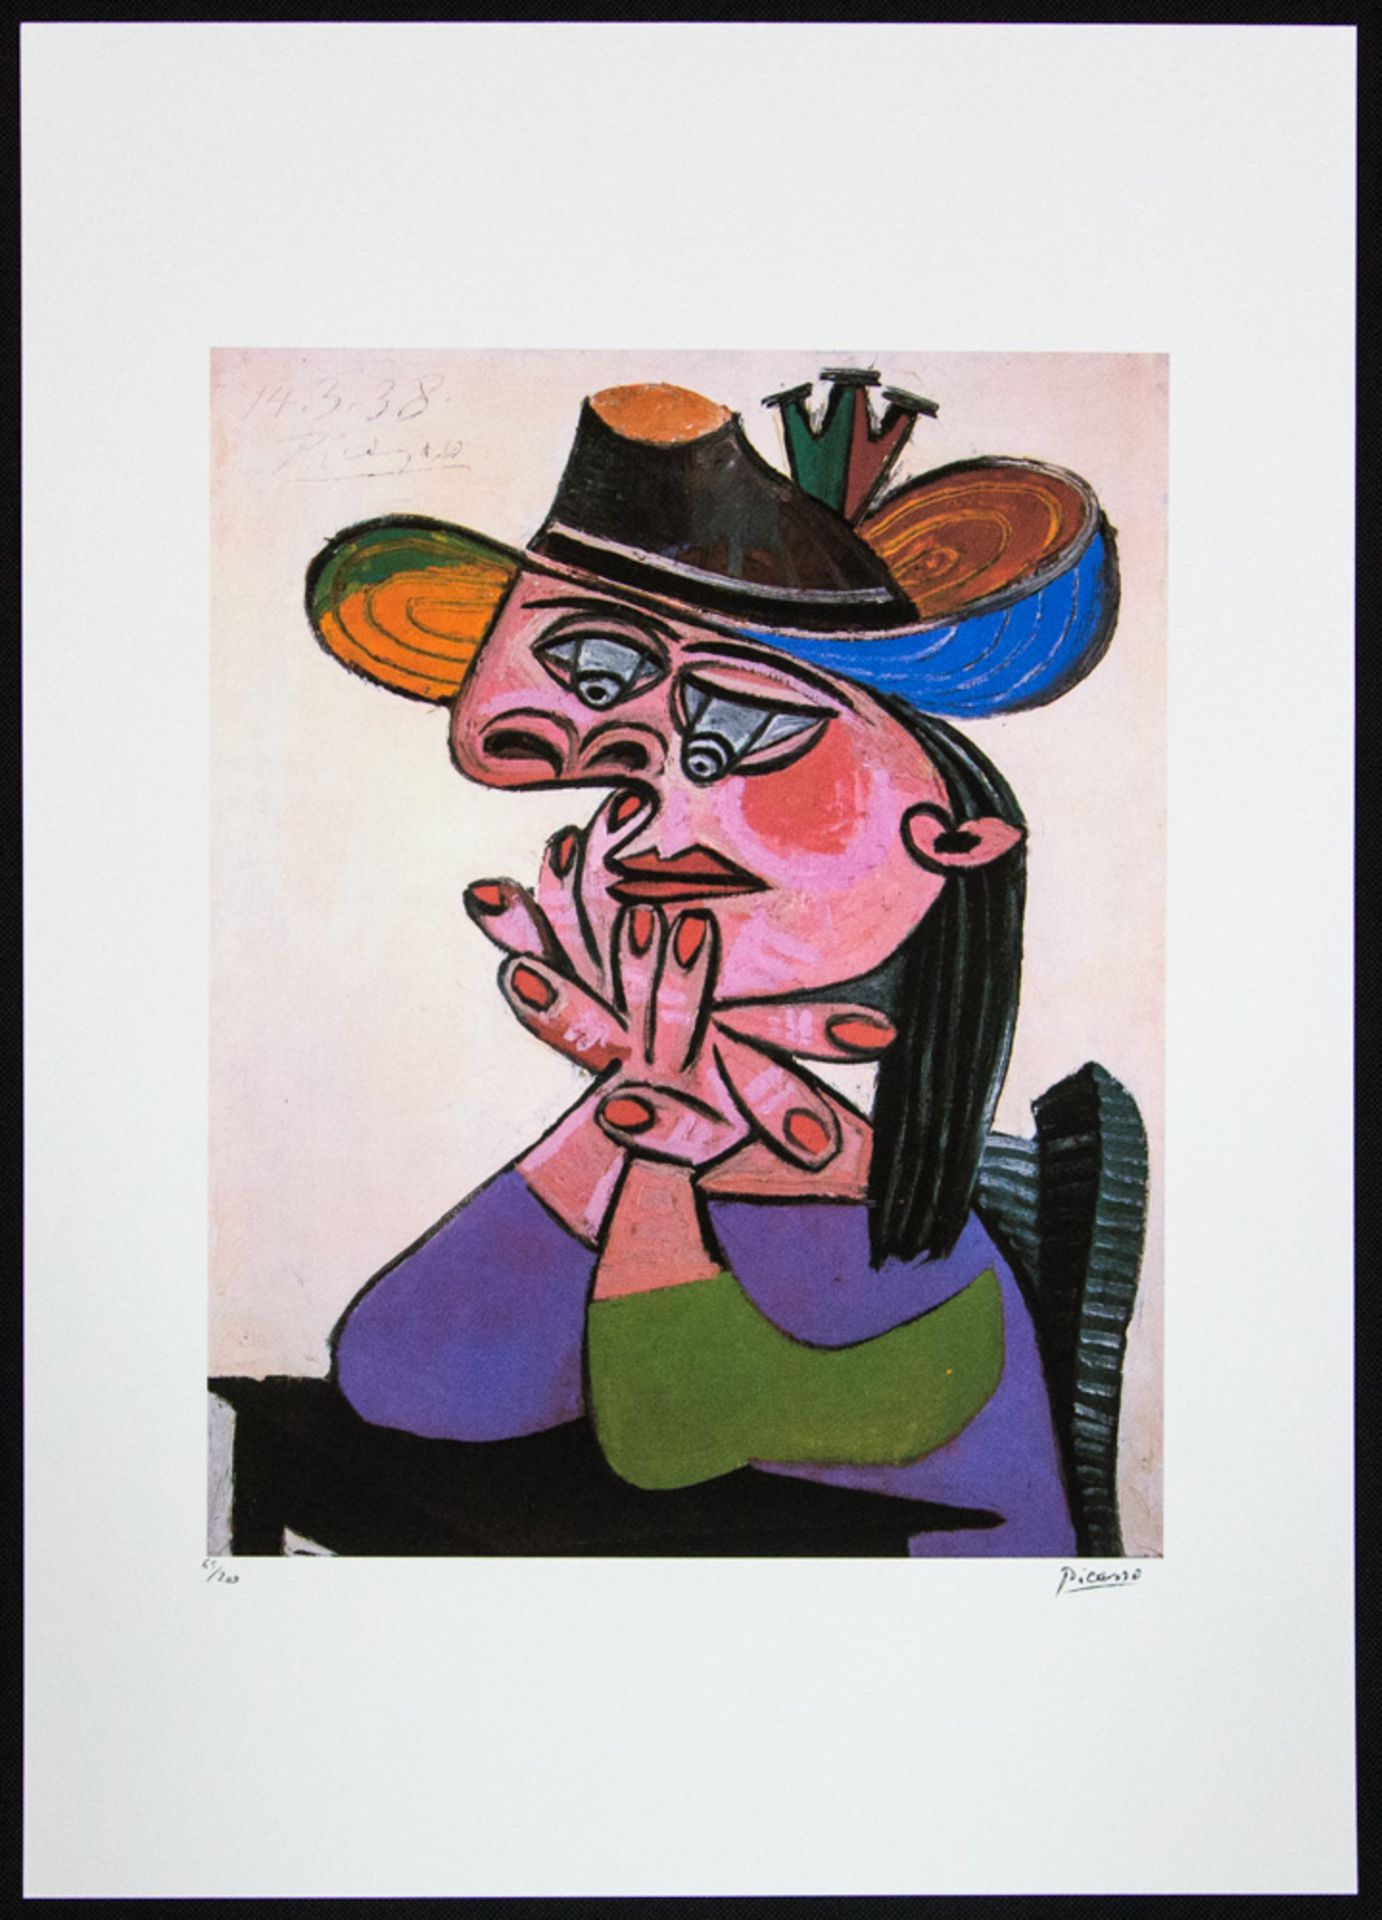 Pablo Picasso 'Woman in a Hat' - Image 2 of 6